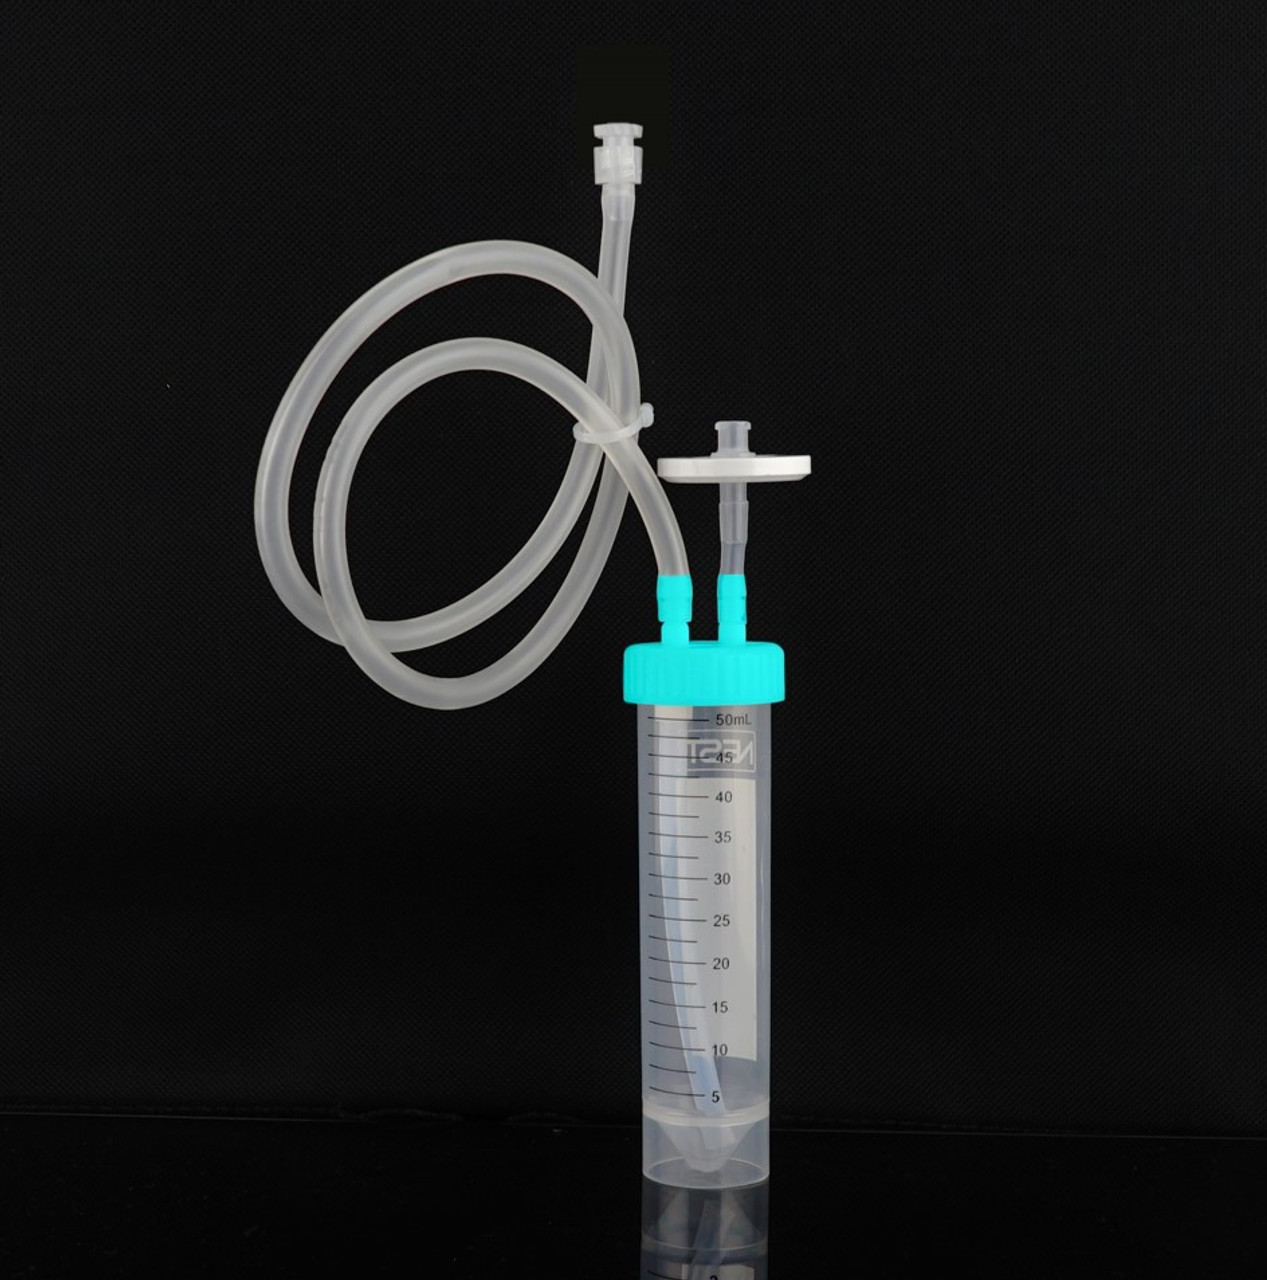 https://cdn11.bigcommerce.com/s-w9bdixgj/images/stencil/1280x1280/products/5810/12209/NEST_Scientific_50ml_centrifuge_tubes_prestalled_with_transfer_caps_For_Bioprocessing_-_Lab_Supplies_-_Stellar_Scientific__59969.1678298556.jpg?c=2